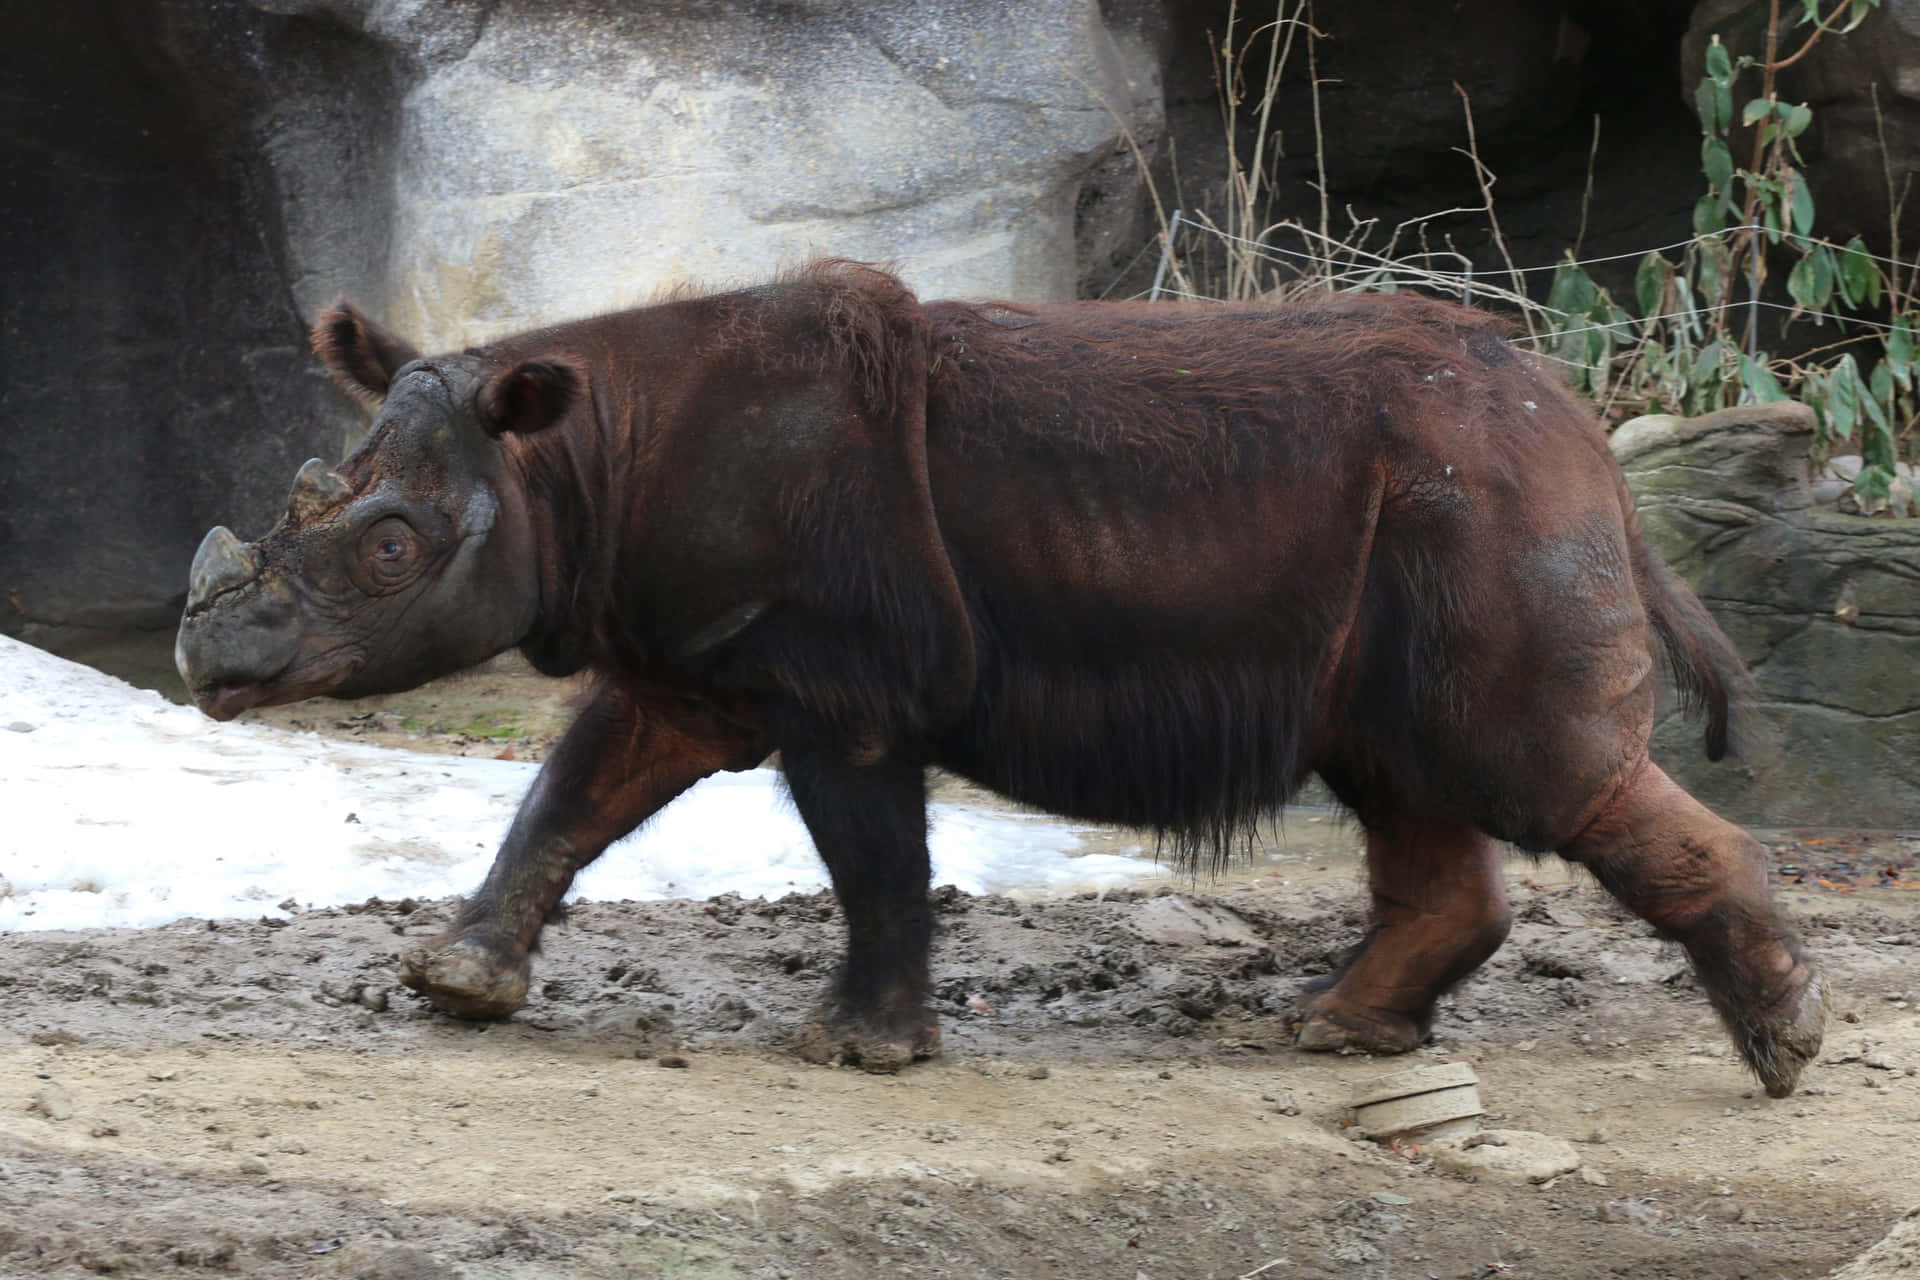 A Rhinoceros standing in profile